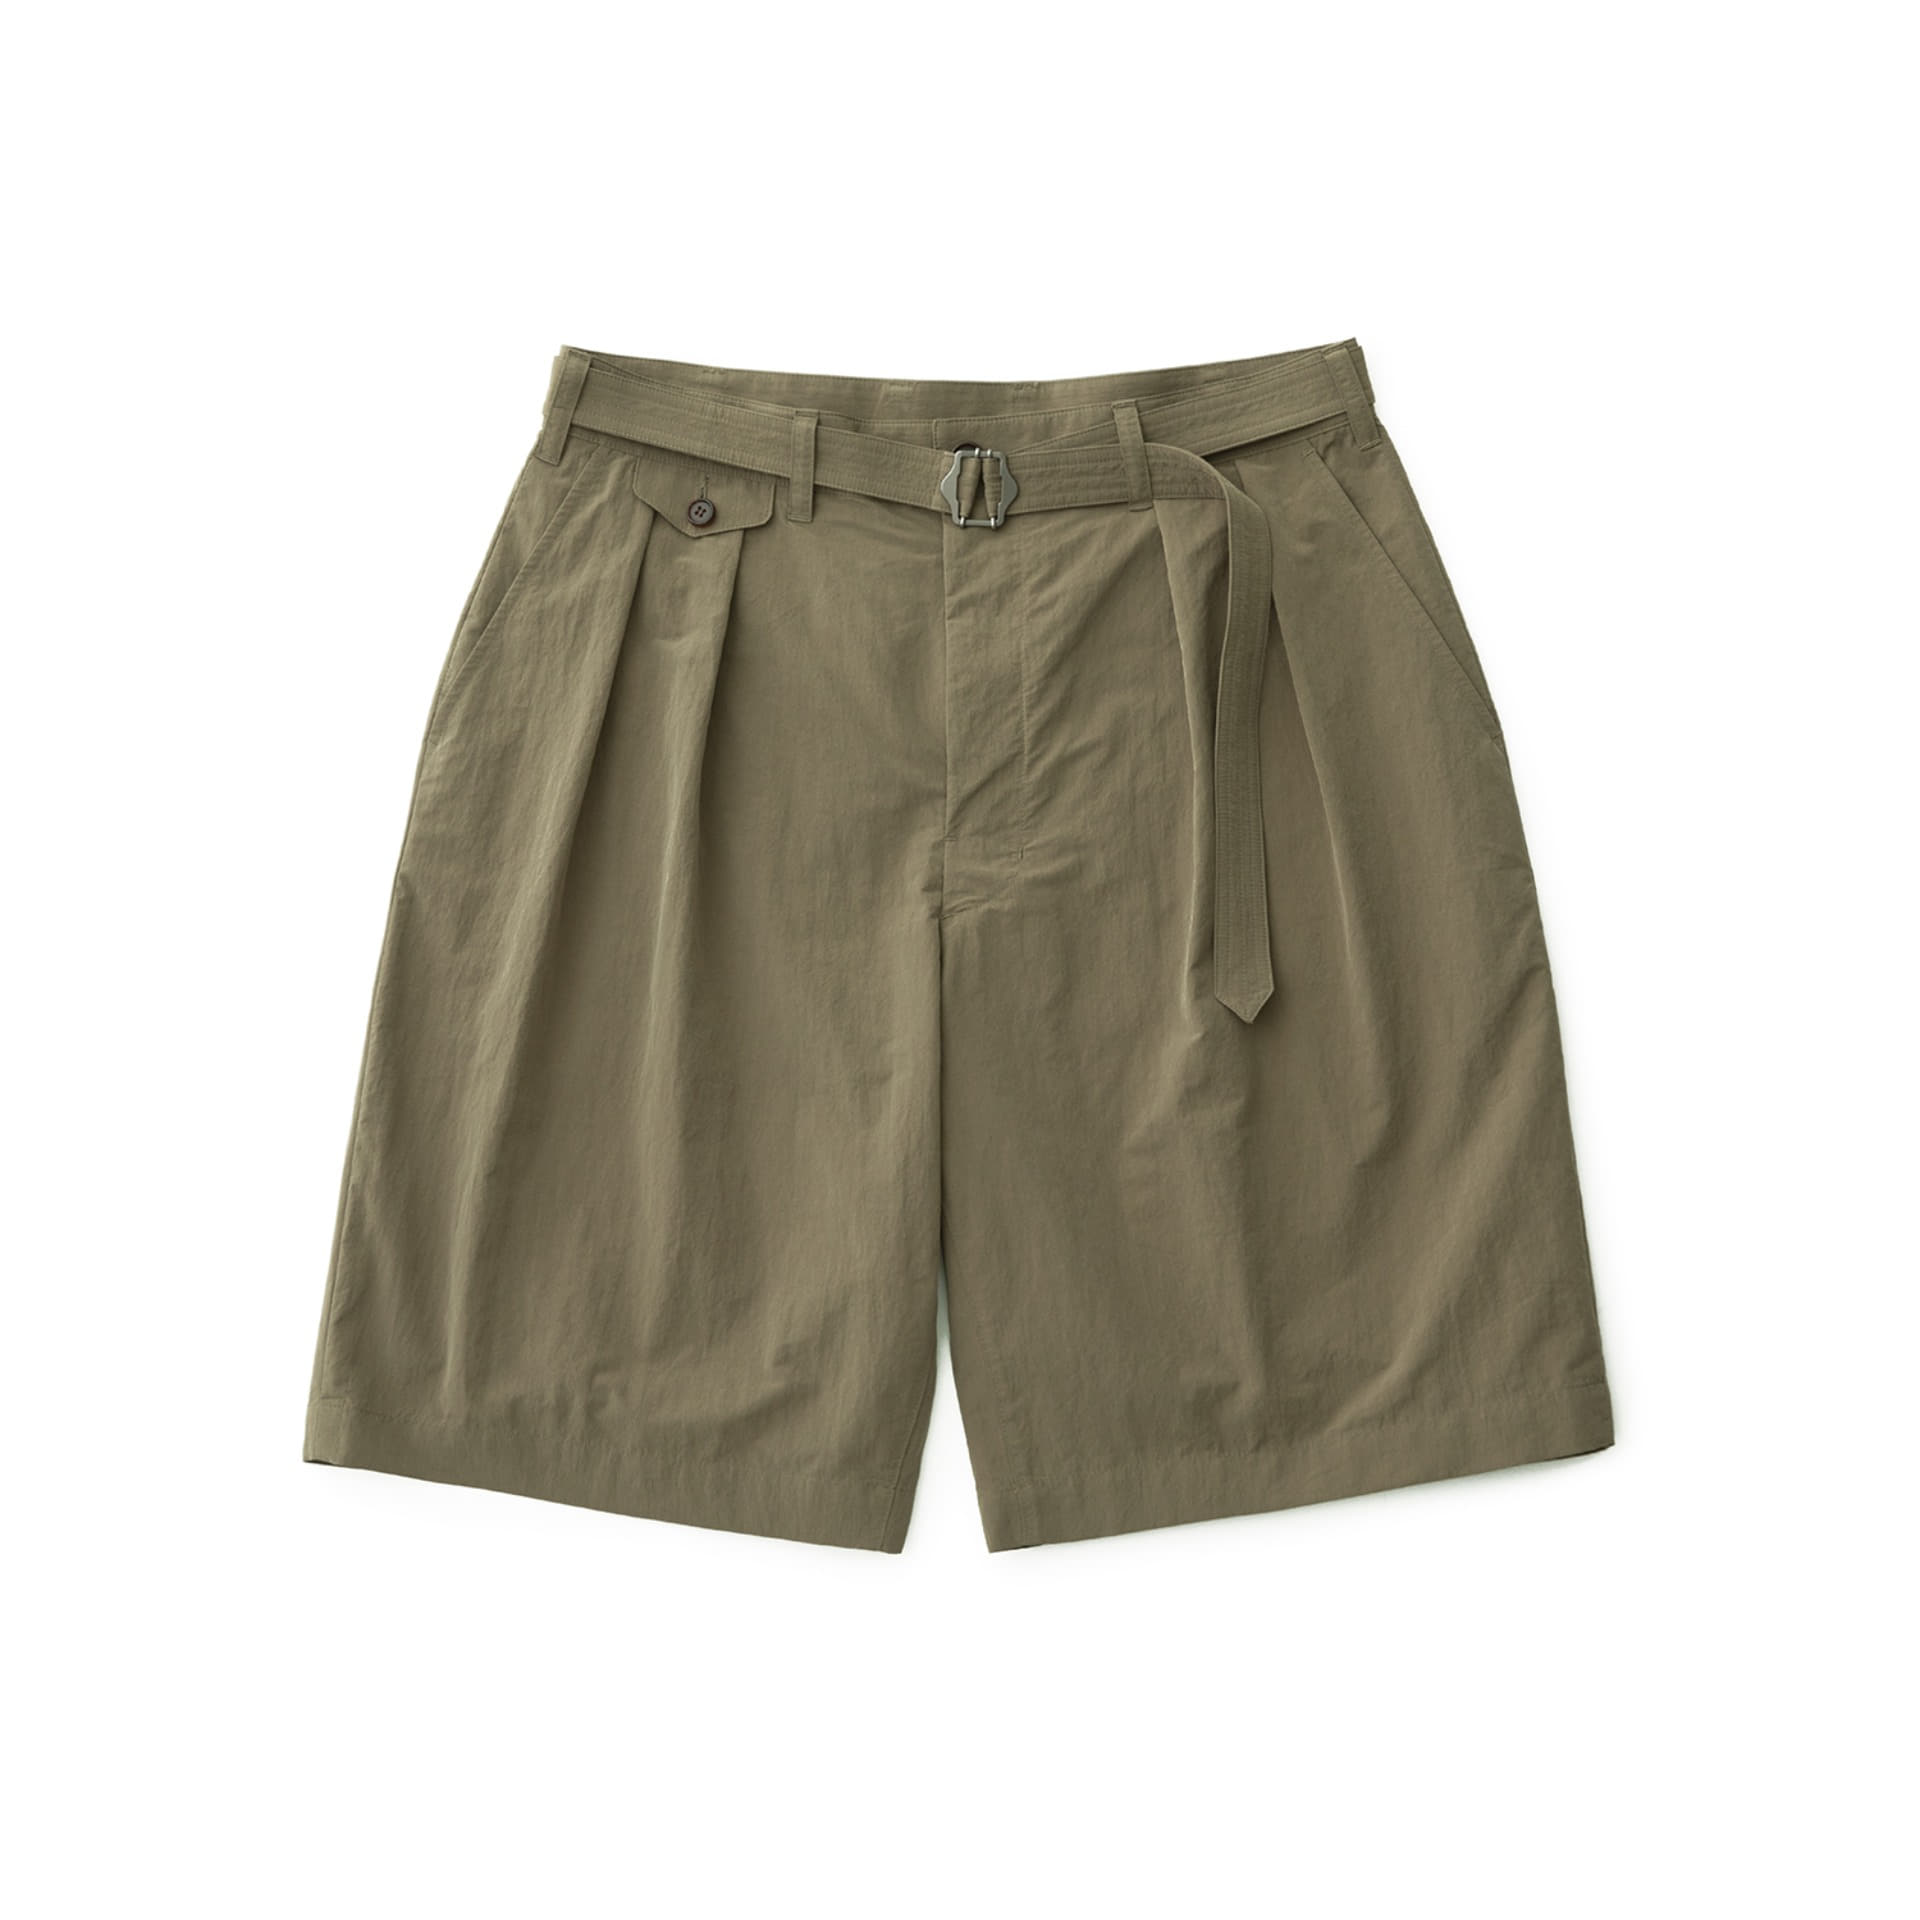 A/O 21SS Hemingway Belted Shorts (Olive Branch)